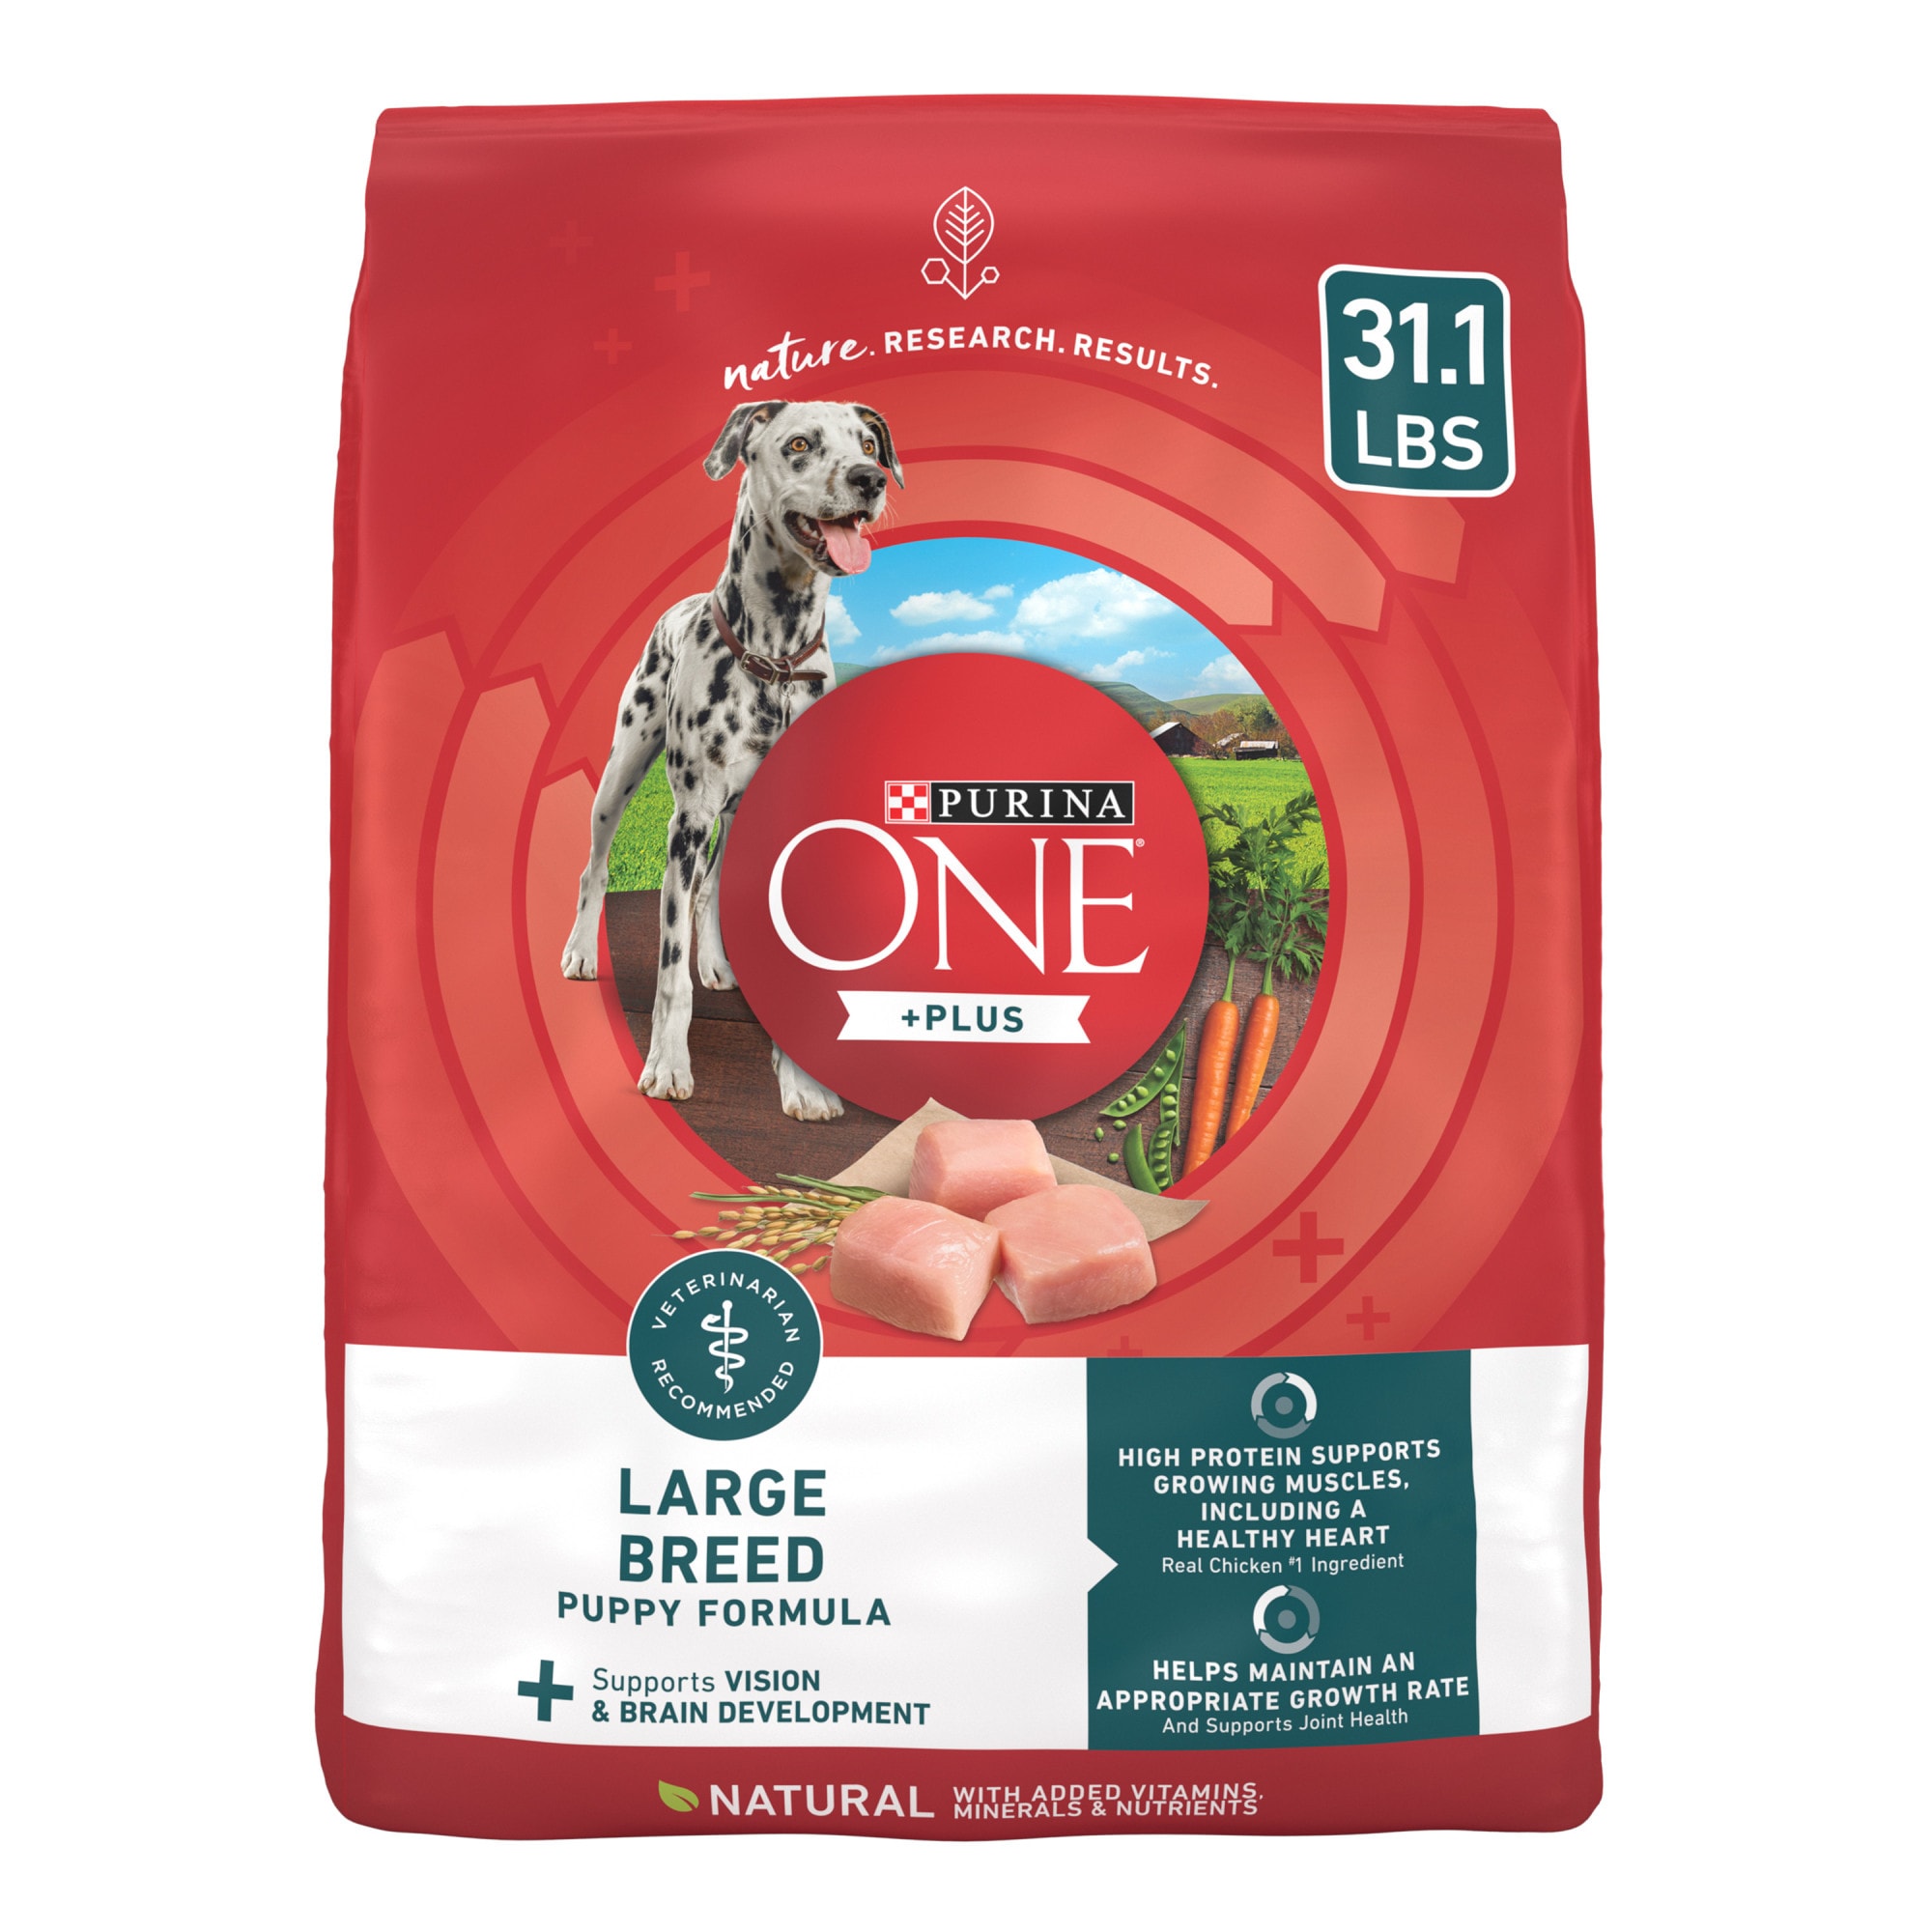 purina-one-natural-plus-high-protein-large-breed-formula-dry-puppy